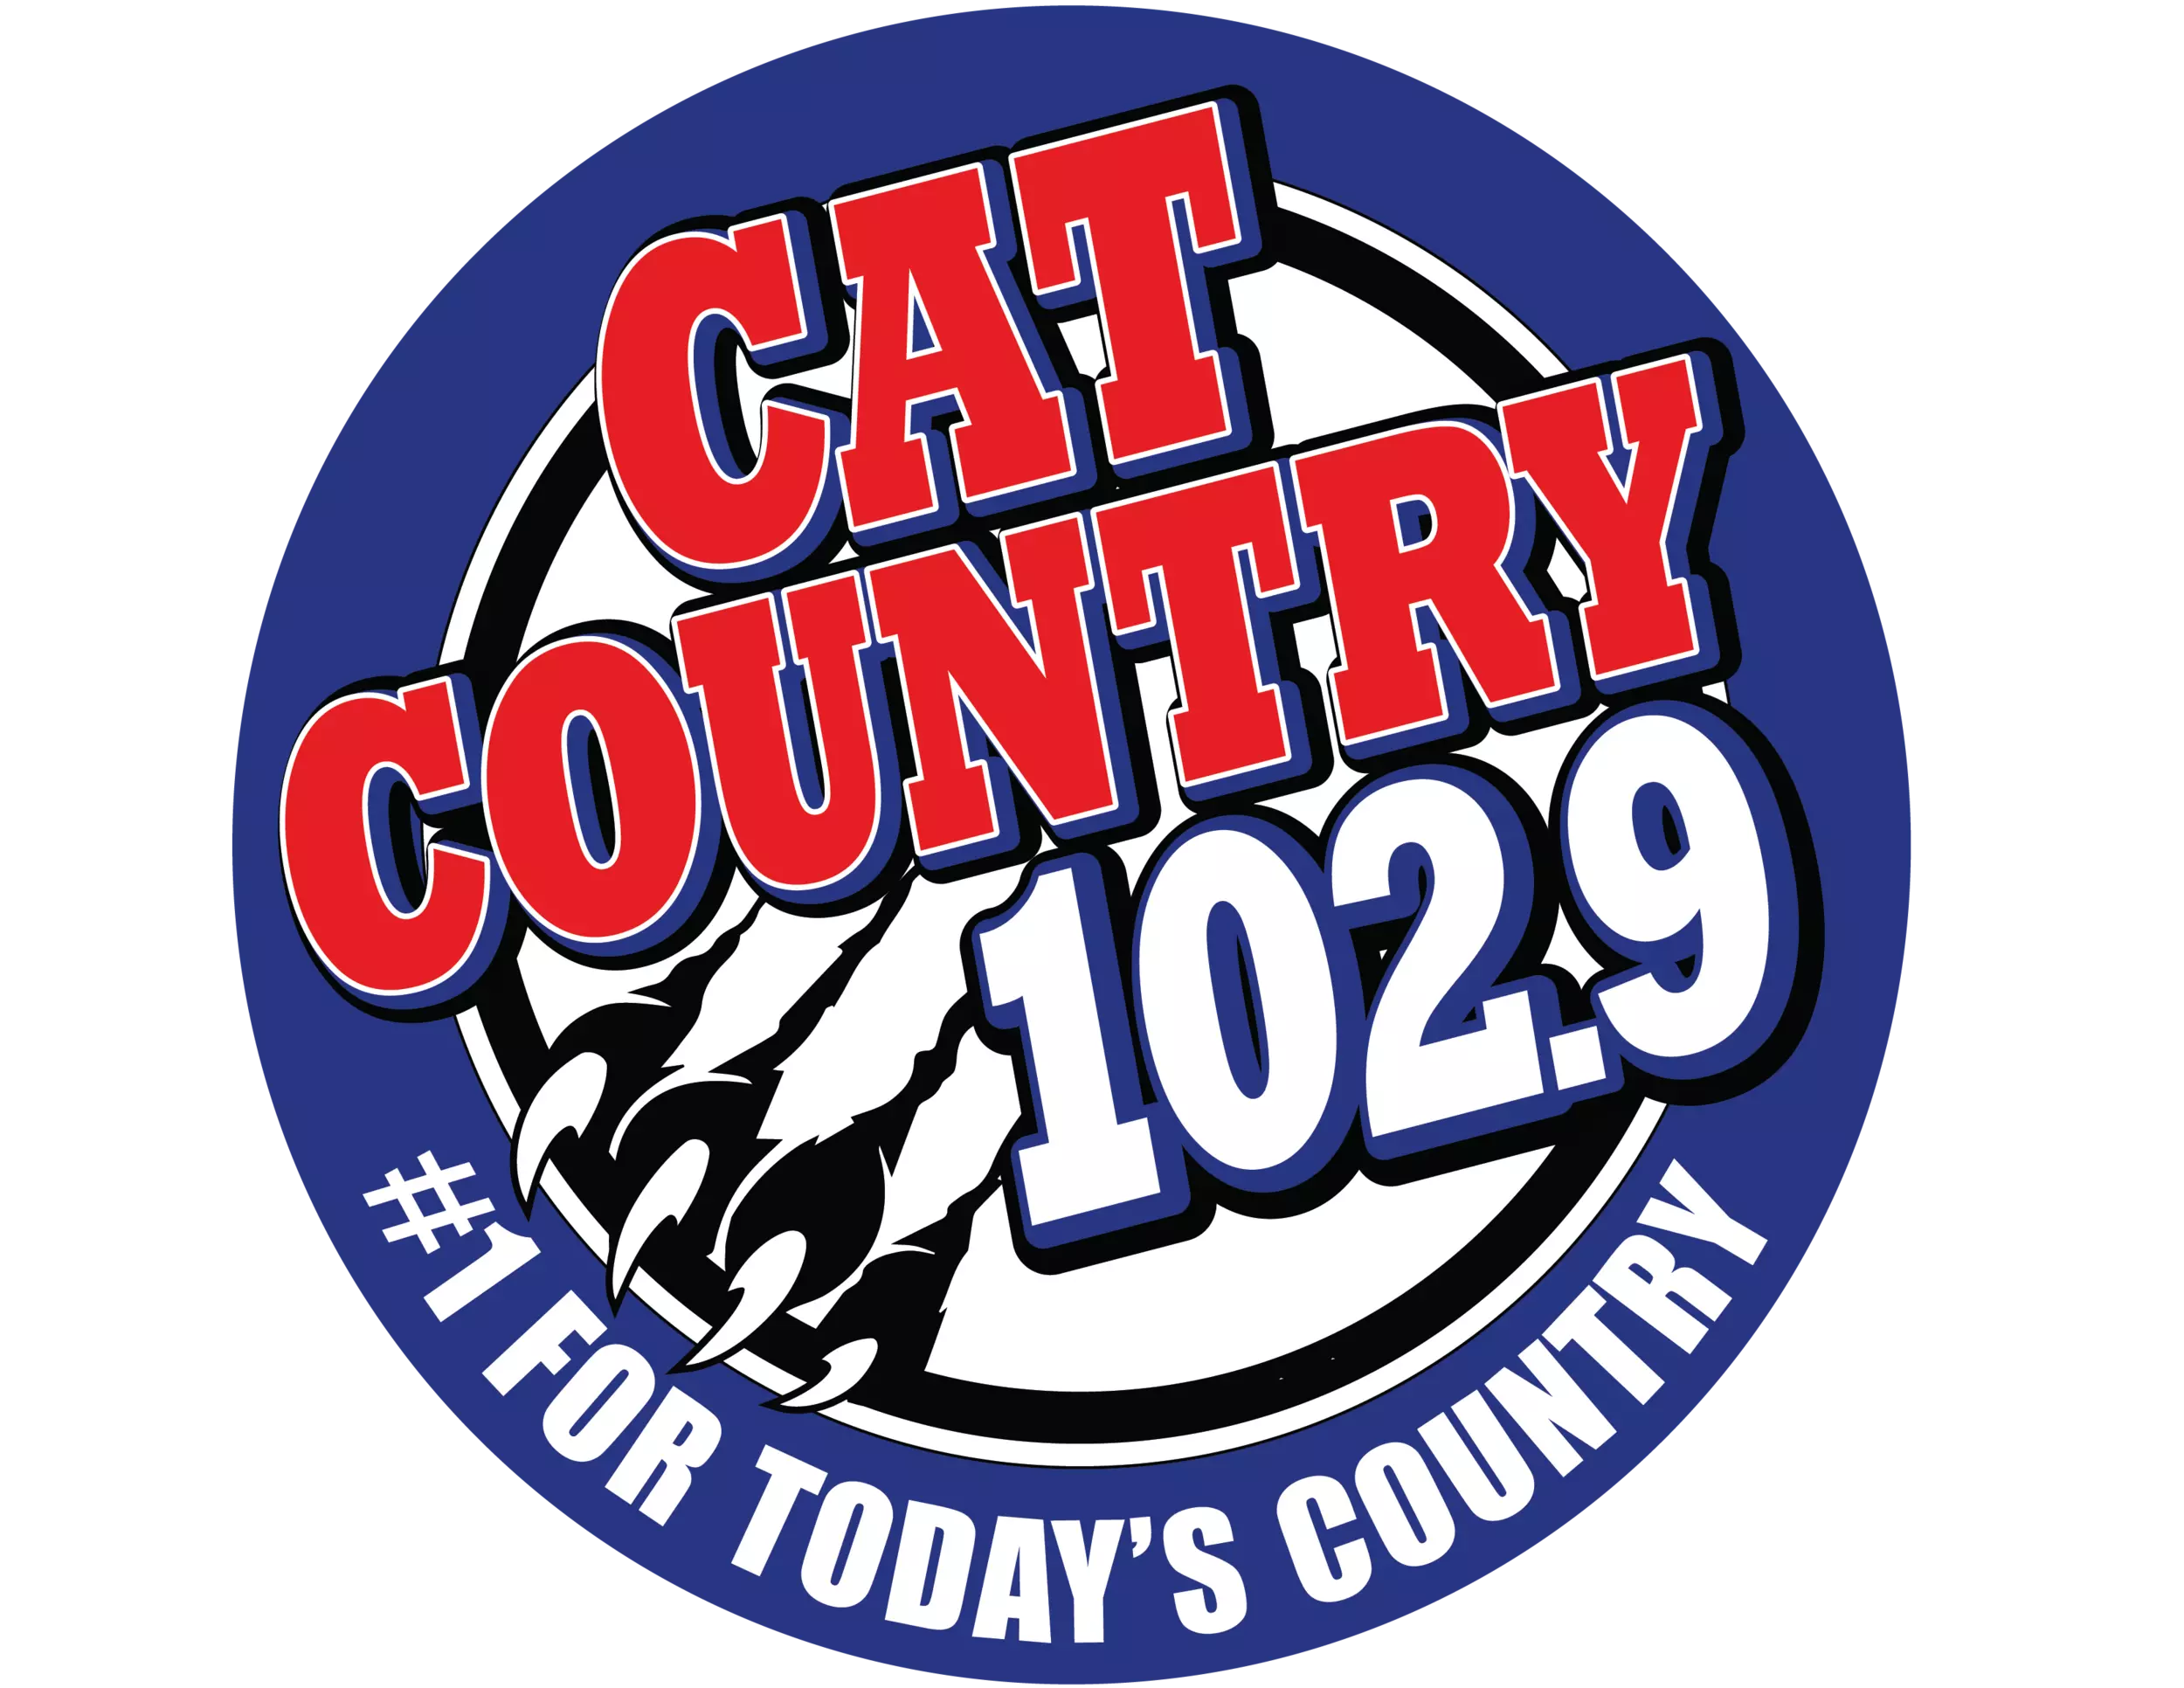 Cat Country 102.9 – We're Montana's Own – Billings Country Radio